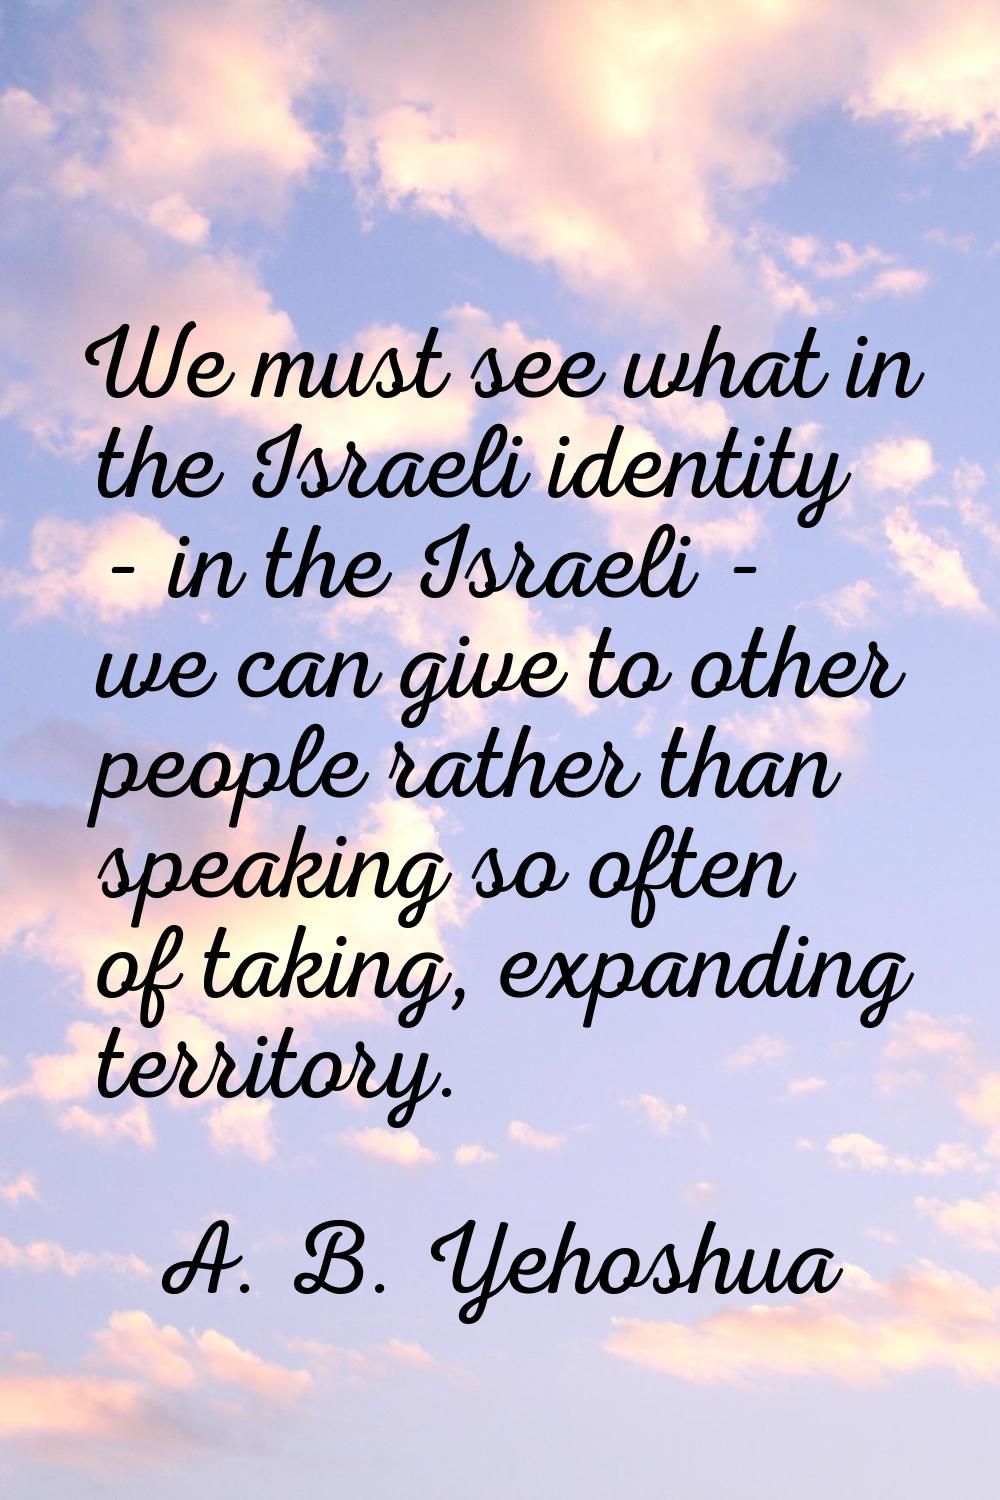 We must see what in the Israeli identity - in the Israeli - we can give to other people rather than